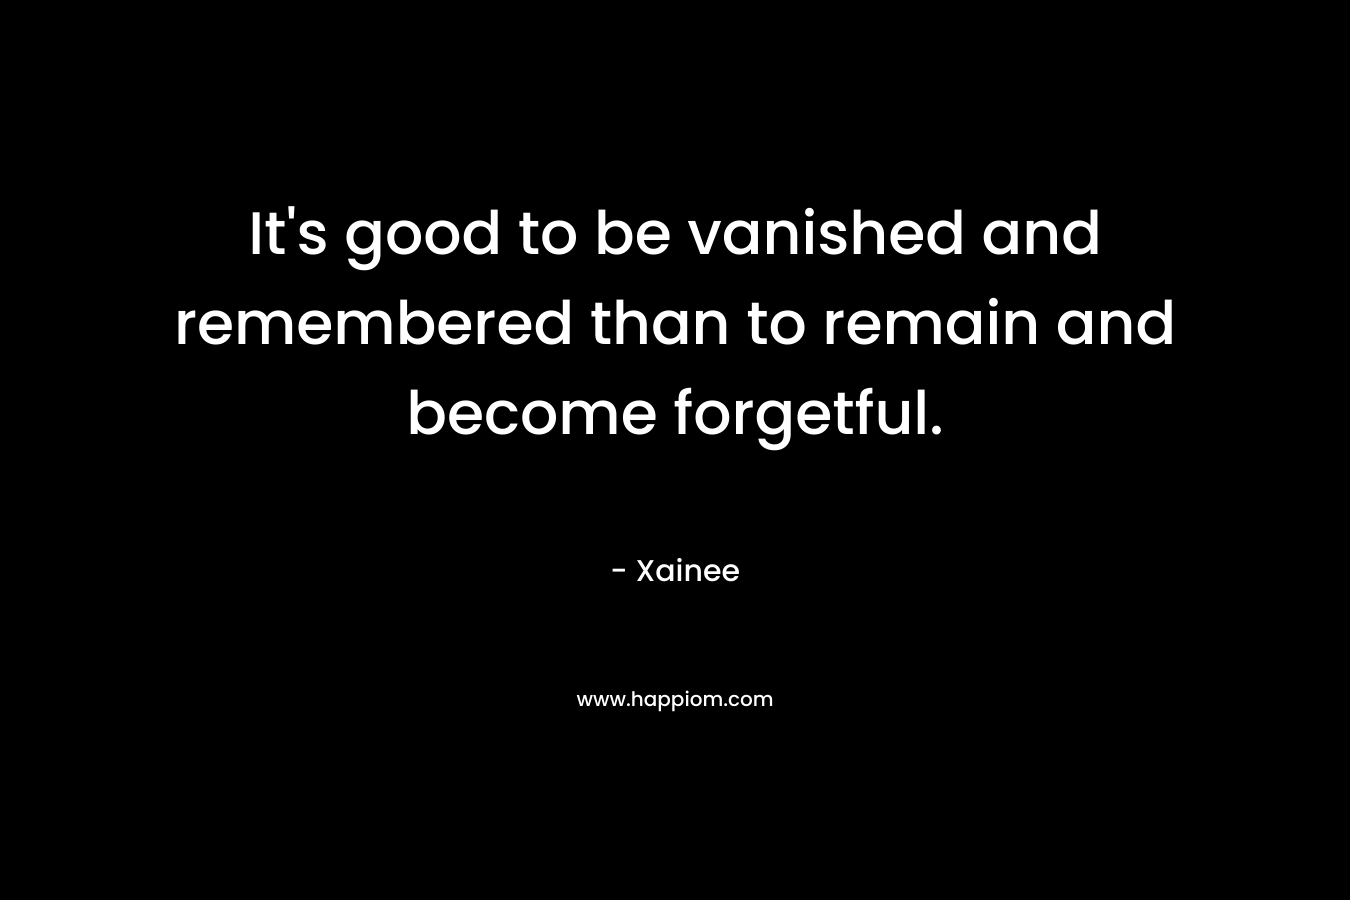 It’s good to be vanished and remembered than to remain and become forgetful. – Xainee